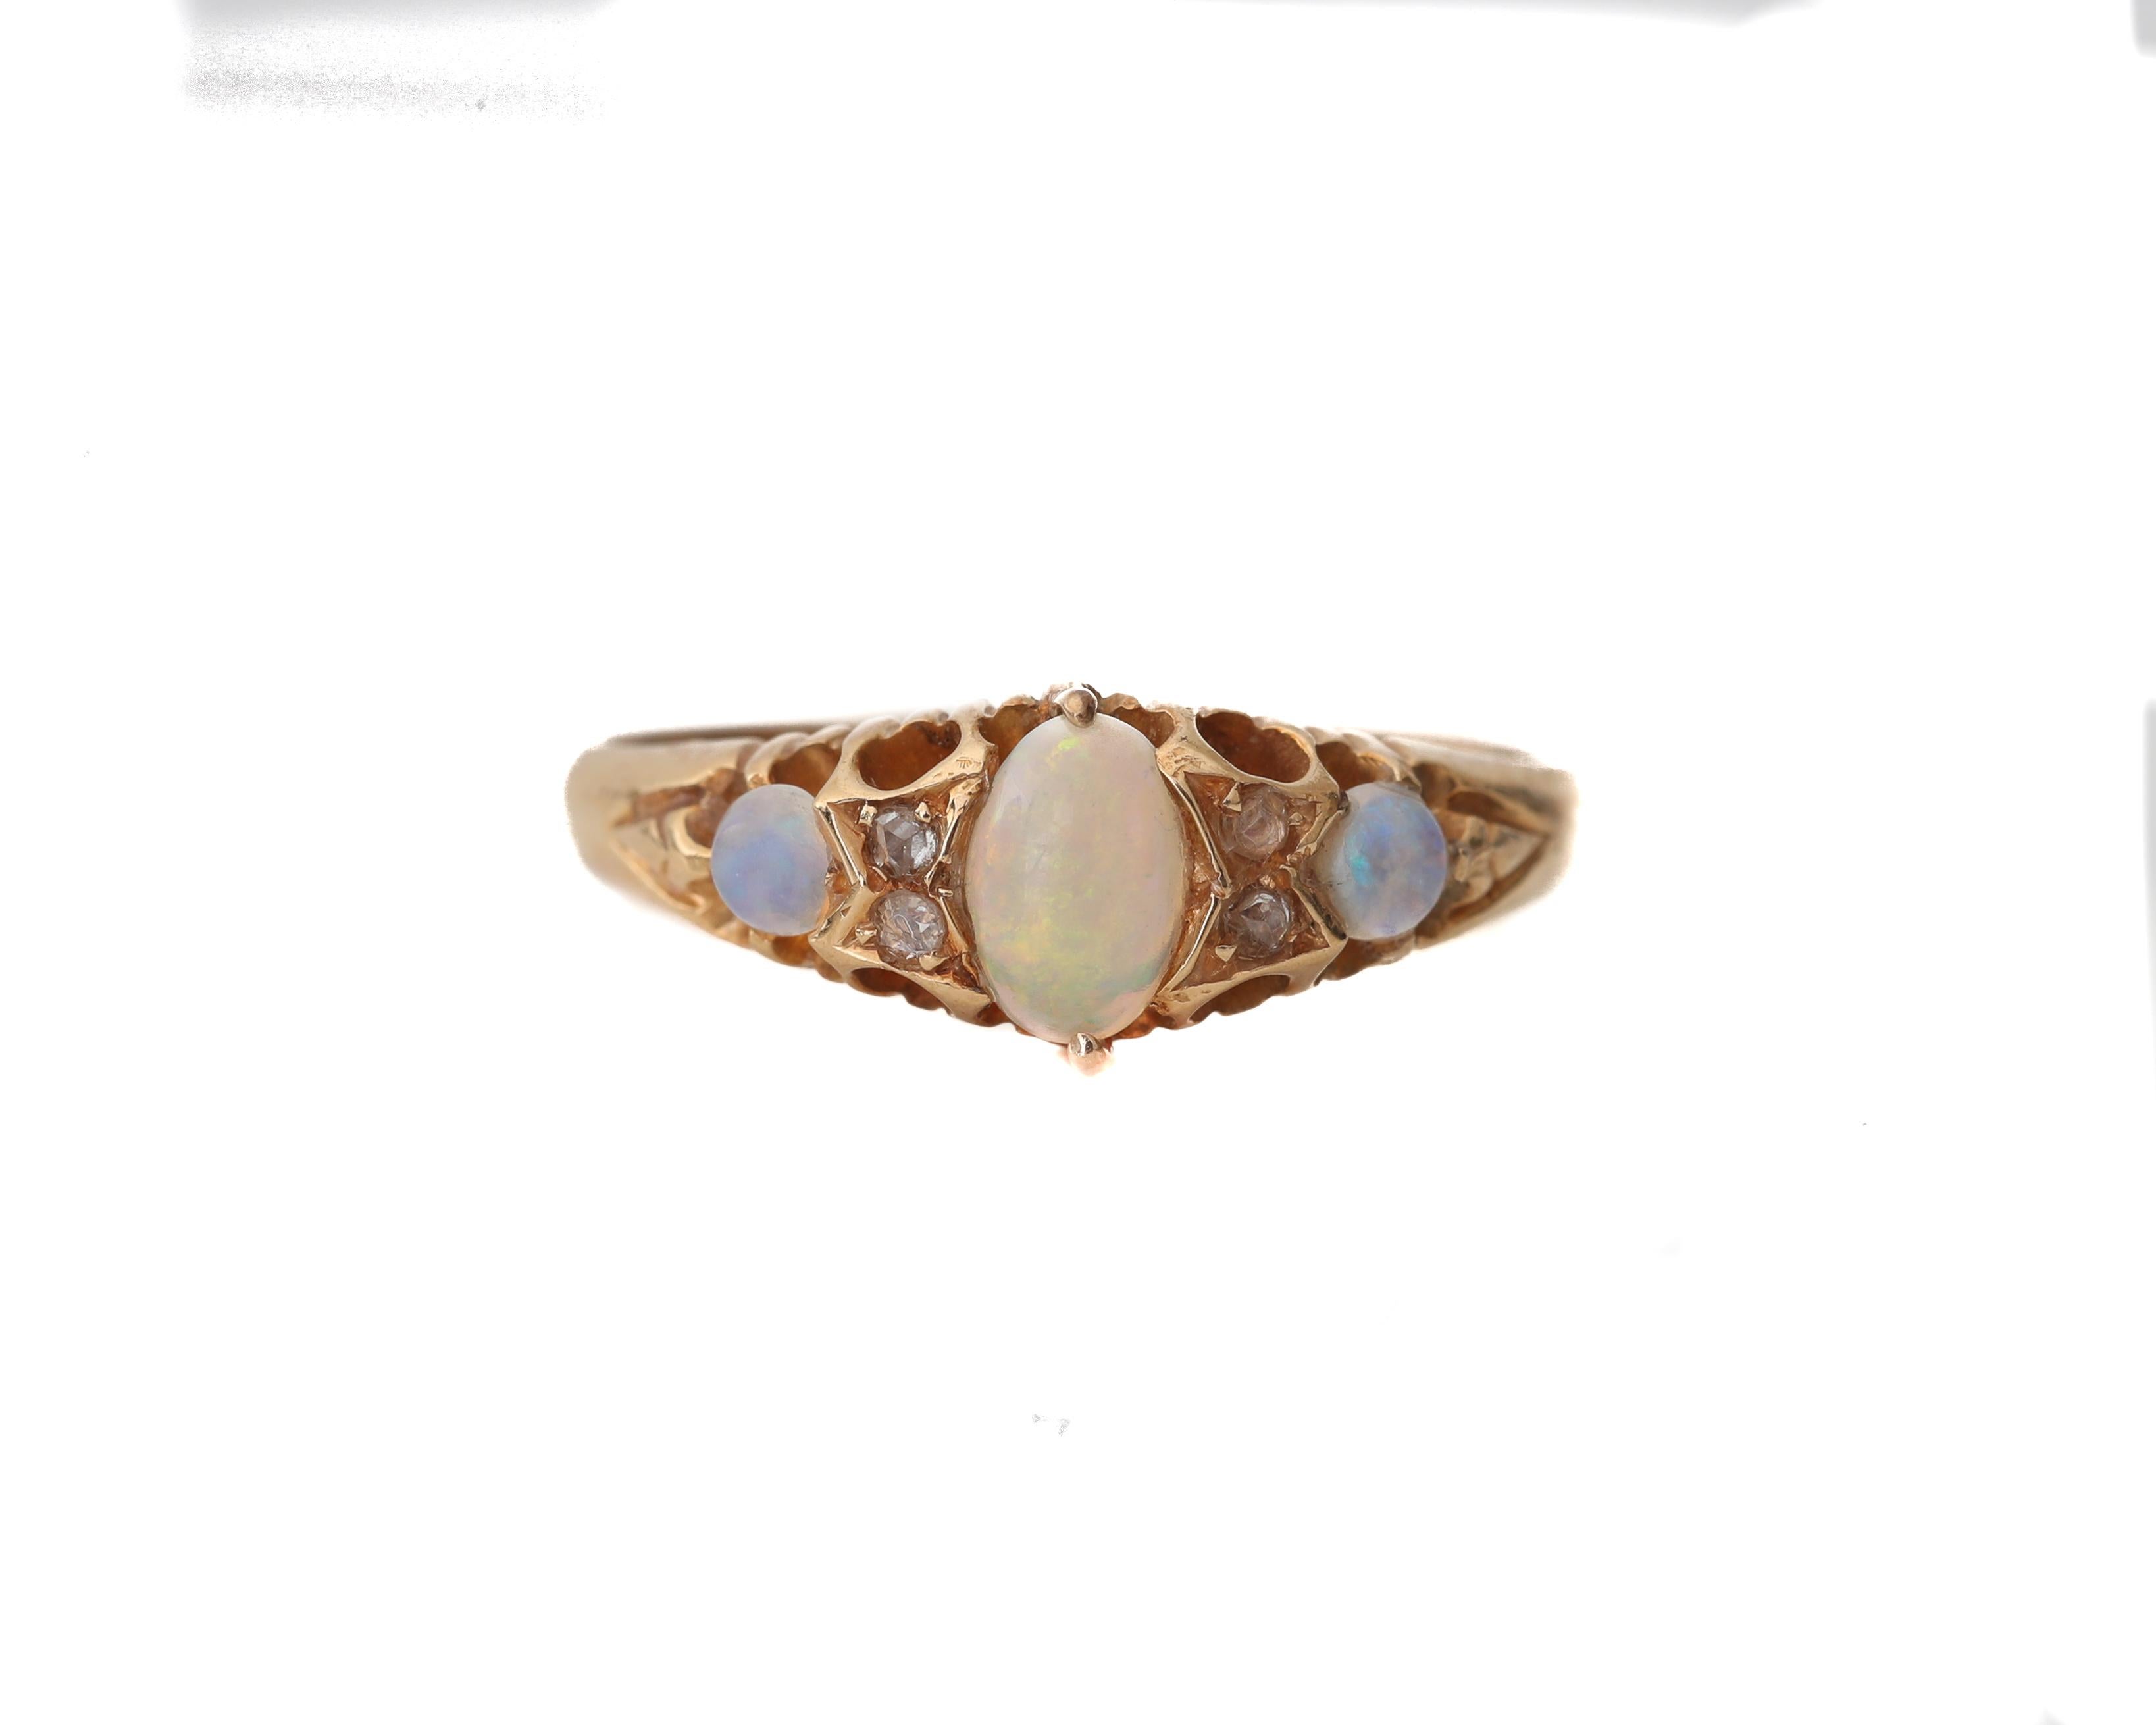 This genuine Victorian beauty is crafted of buttery yellow 18K gold with a large center opal, flanked by diamond rose cuts and two smaller round opals. The shank tapers down from the head towards the shoulder. Center opal is approximately .27 carats